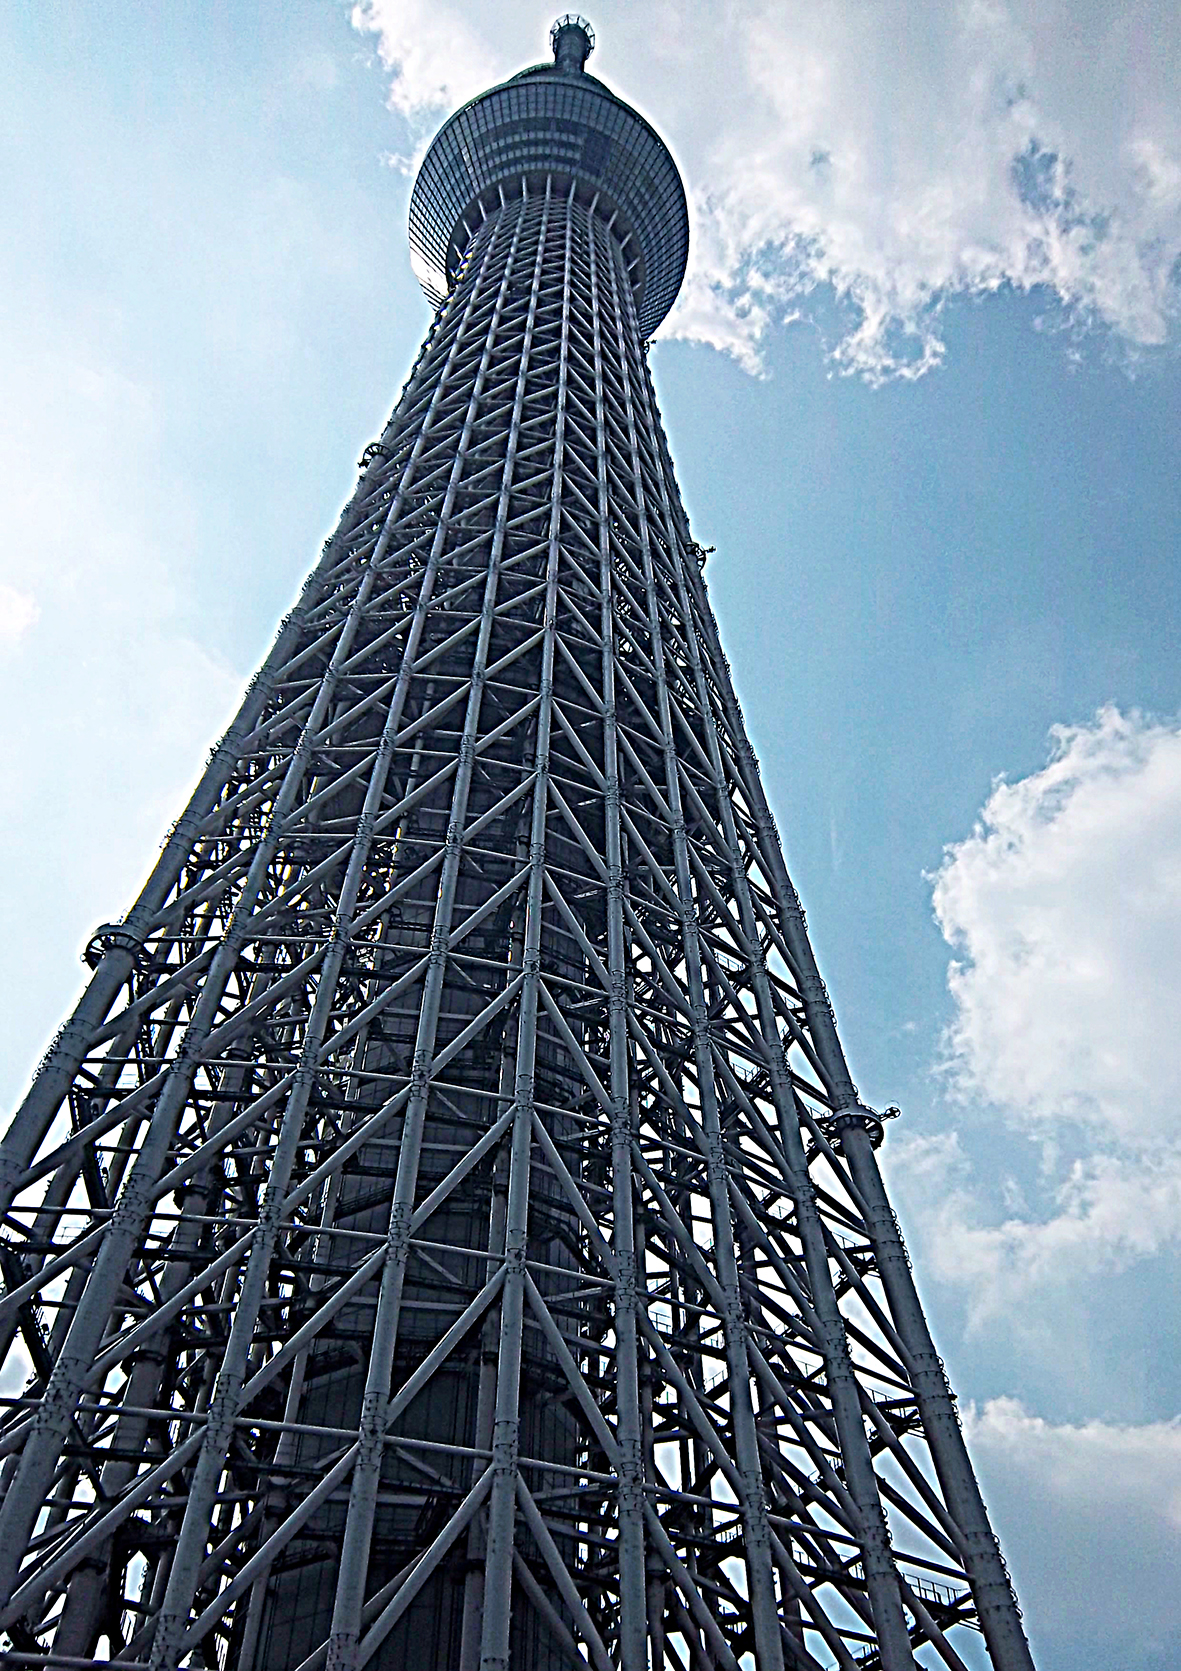 looking up through the scaffold-type construction of Skytree to the first disc-like viewing platform, and beyond into the blue sky.